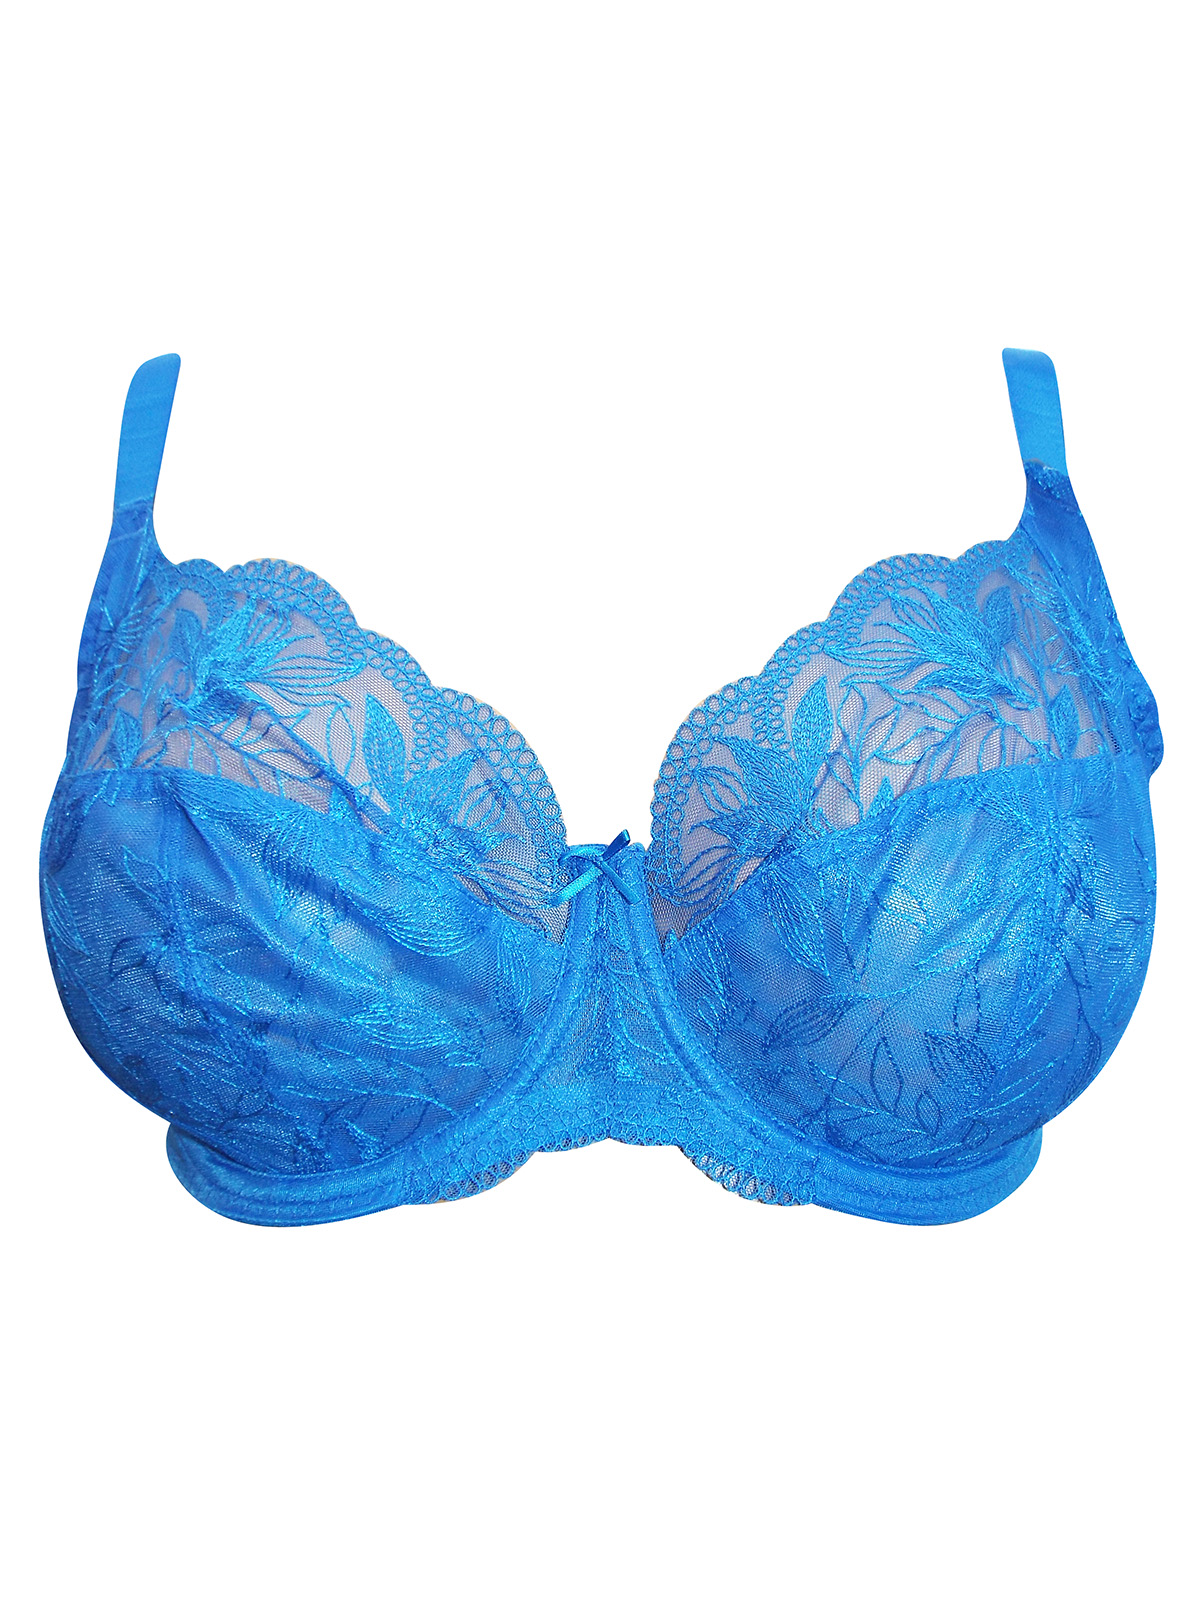 George - - G3ORGE BLUE Non-Padded Full Cup Embroidered Bra - Size